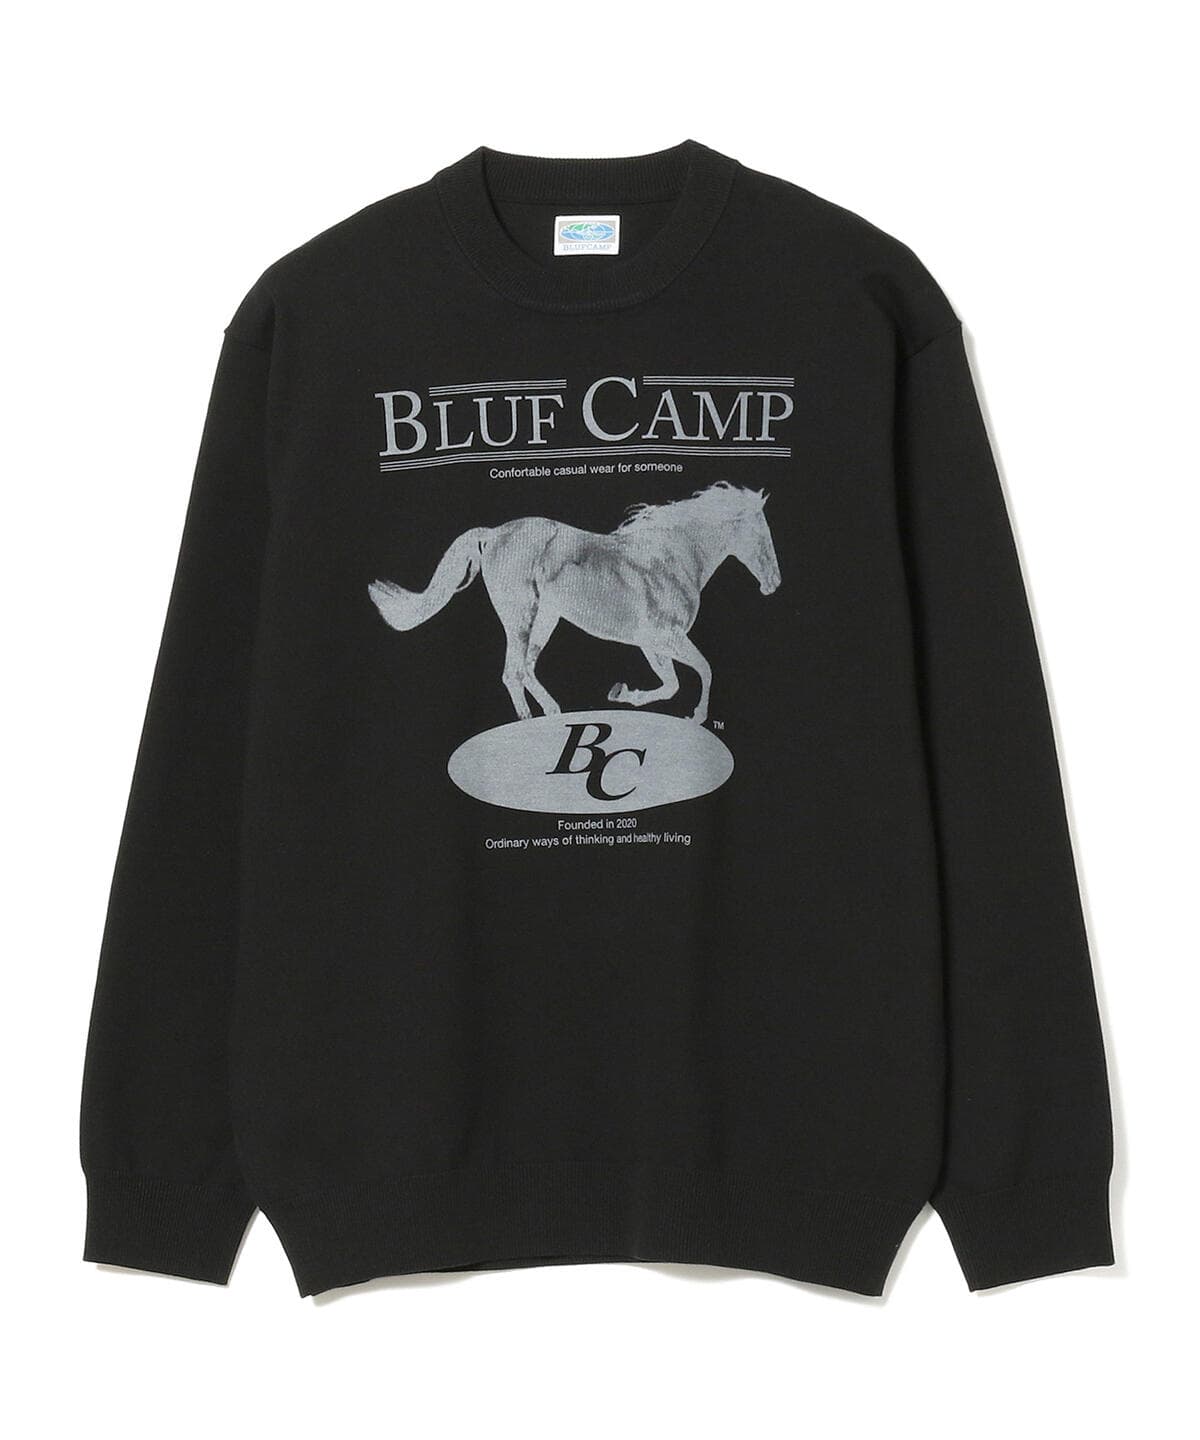 BEAMS [BEAMS] BLUFCAMP / Printed-Cotton Sweater (tops knit ...